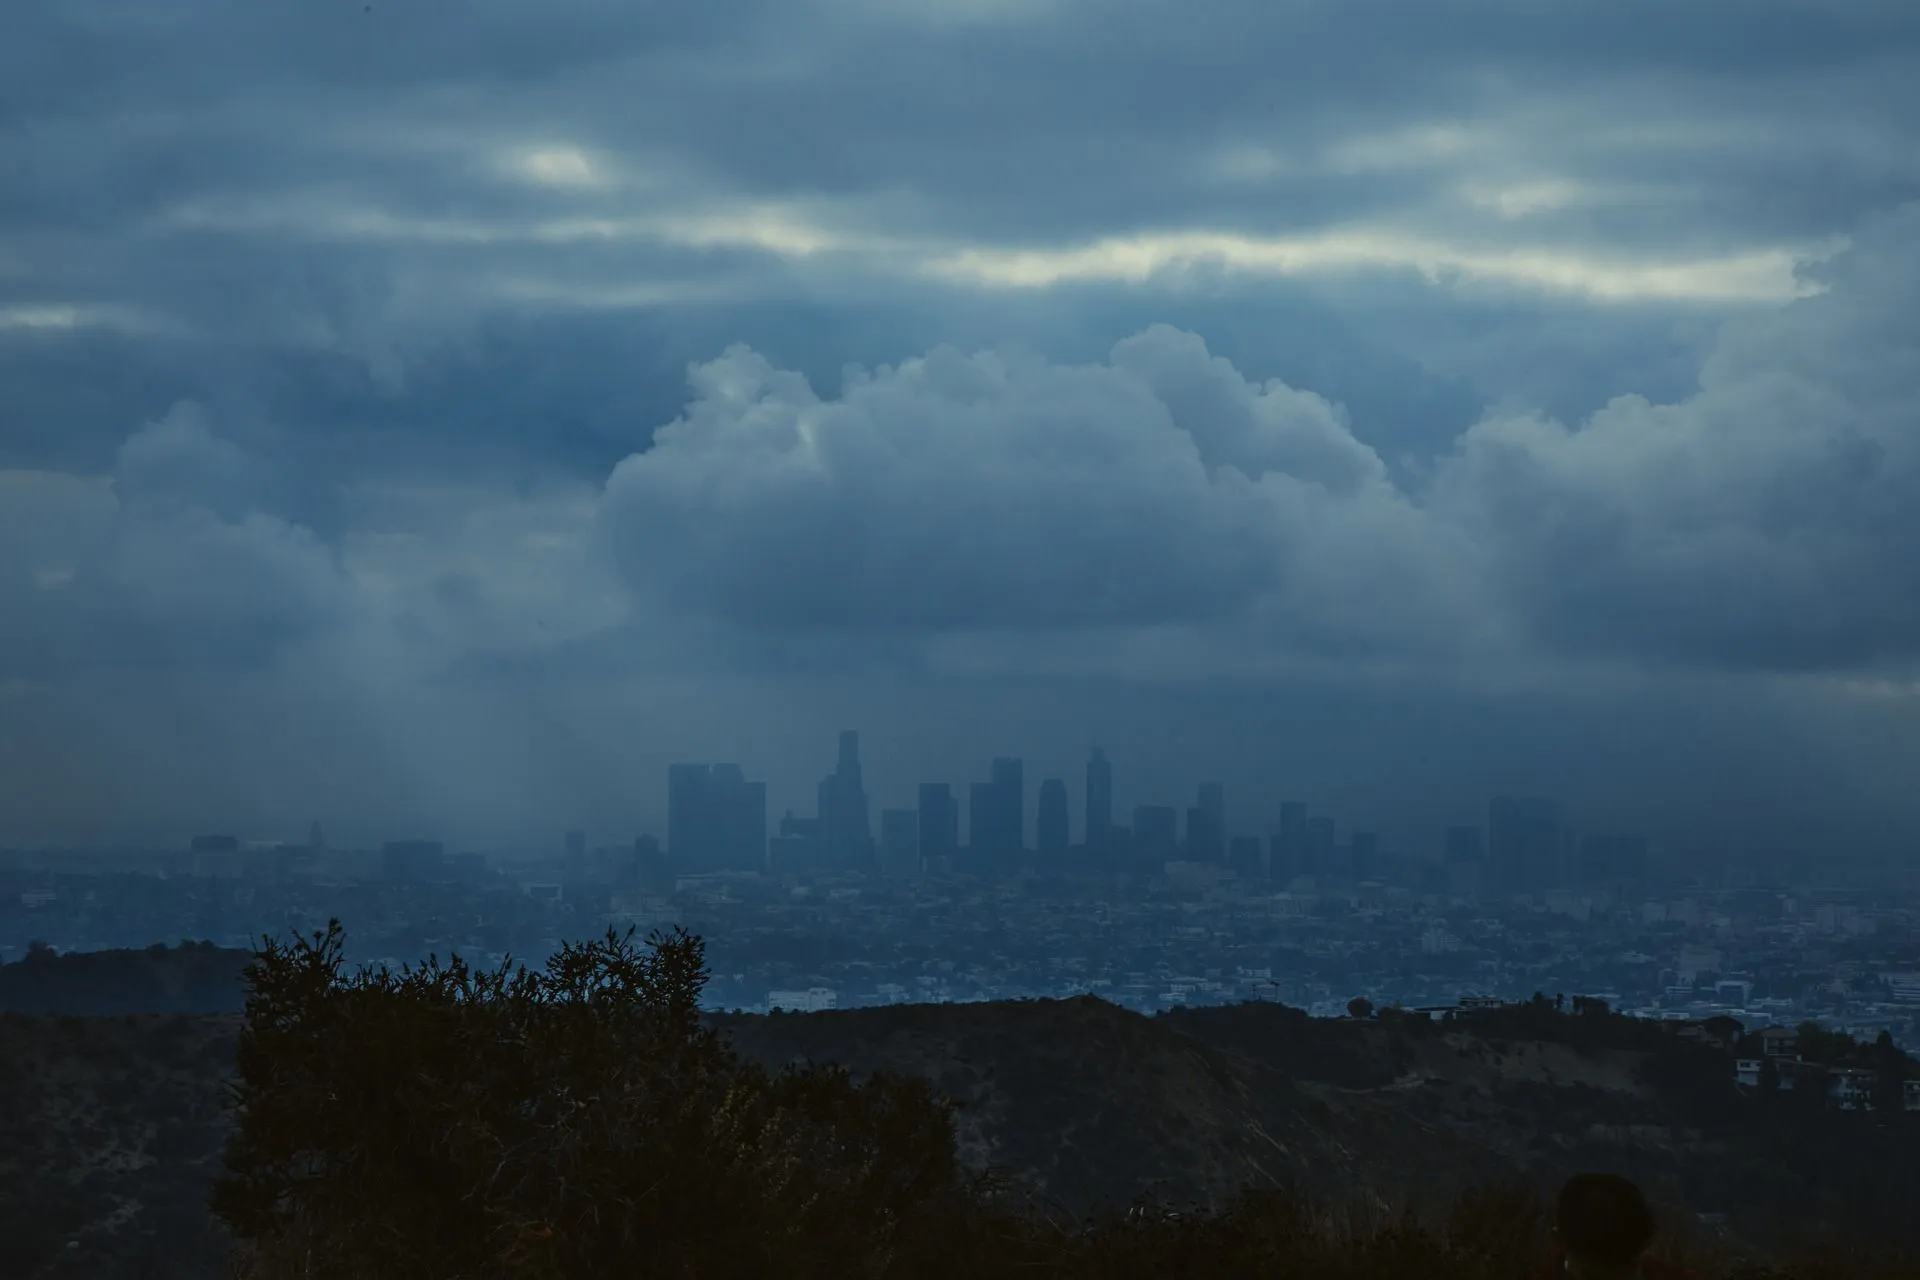 California Air Resources Board is working to reduce pollution levels.